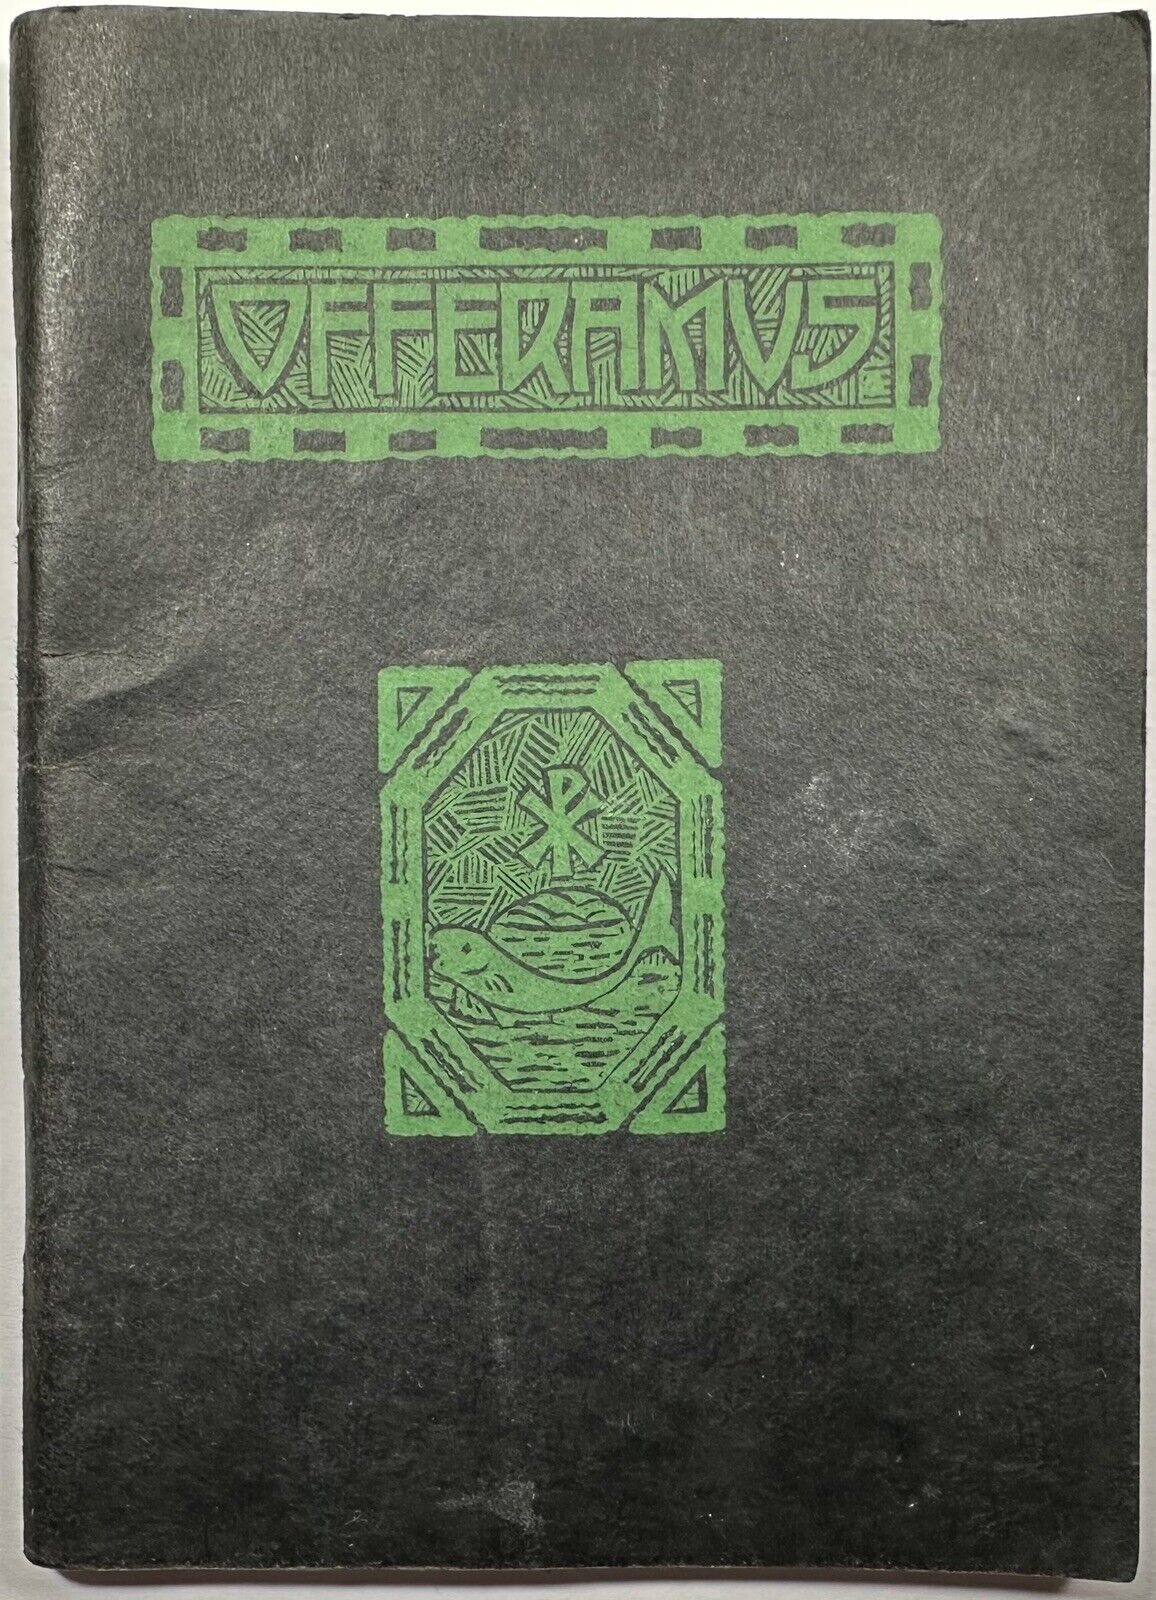 Offeramus, A Manual of the Ordinary Mass, Vintage 1935 Holy Devotional Booklet.